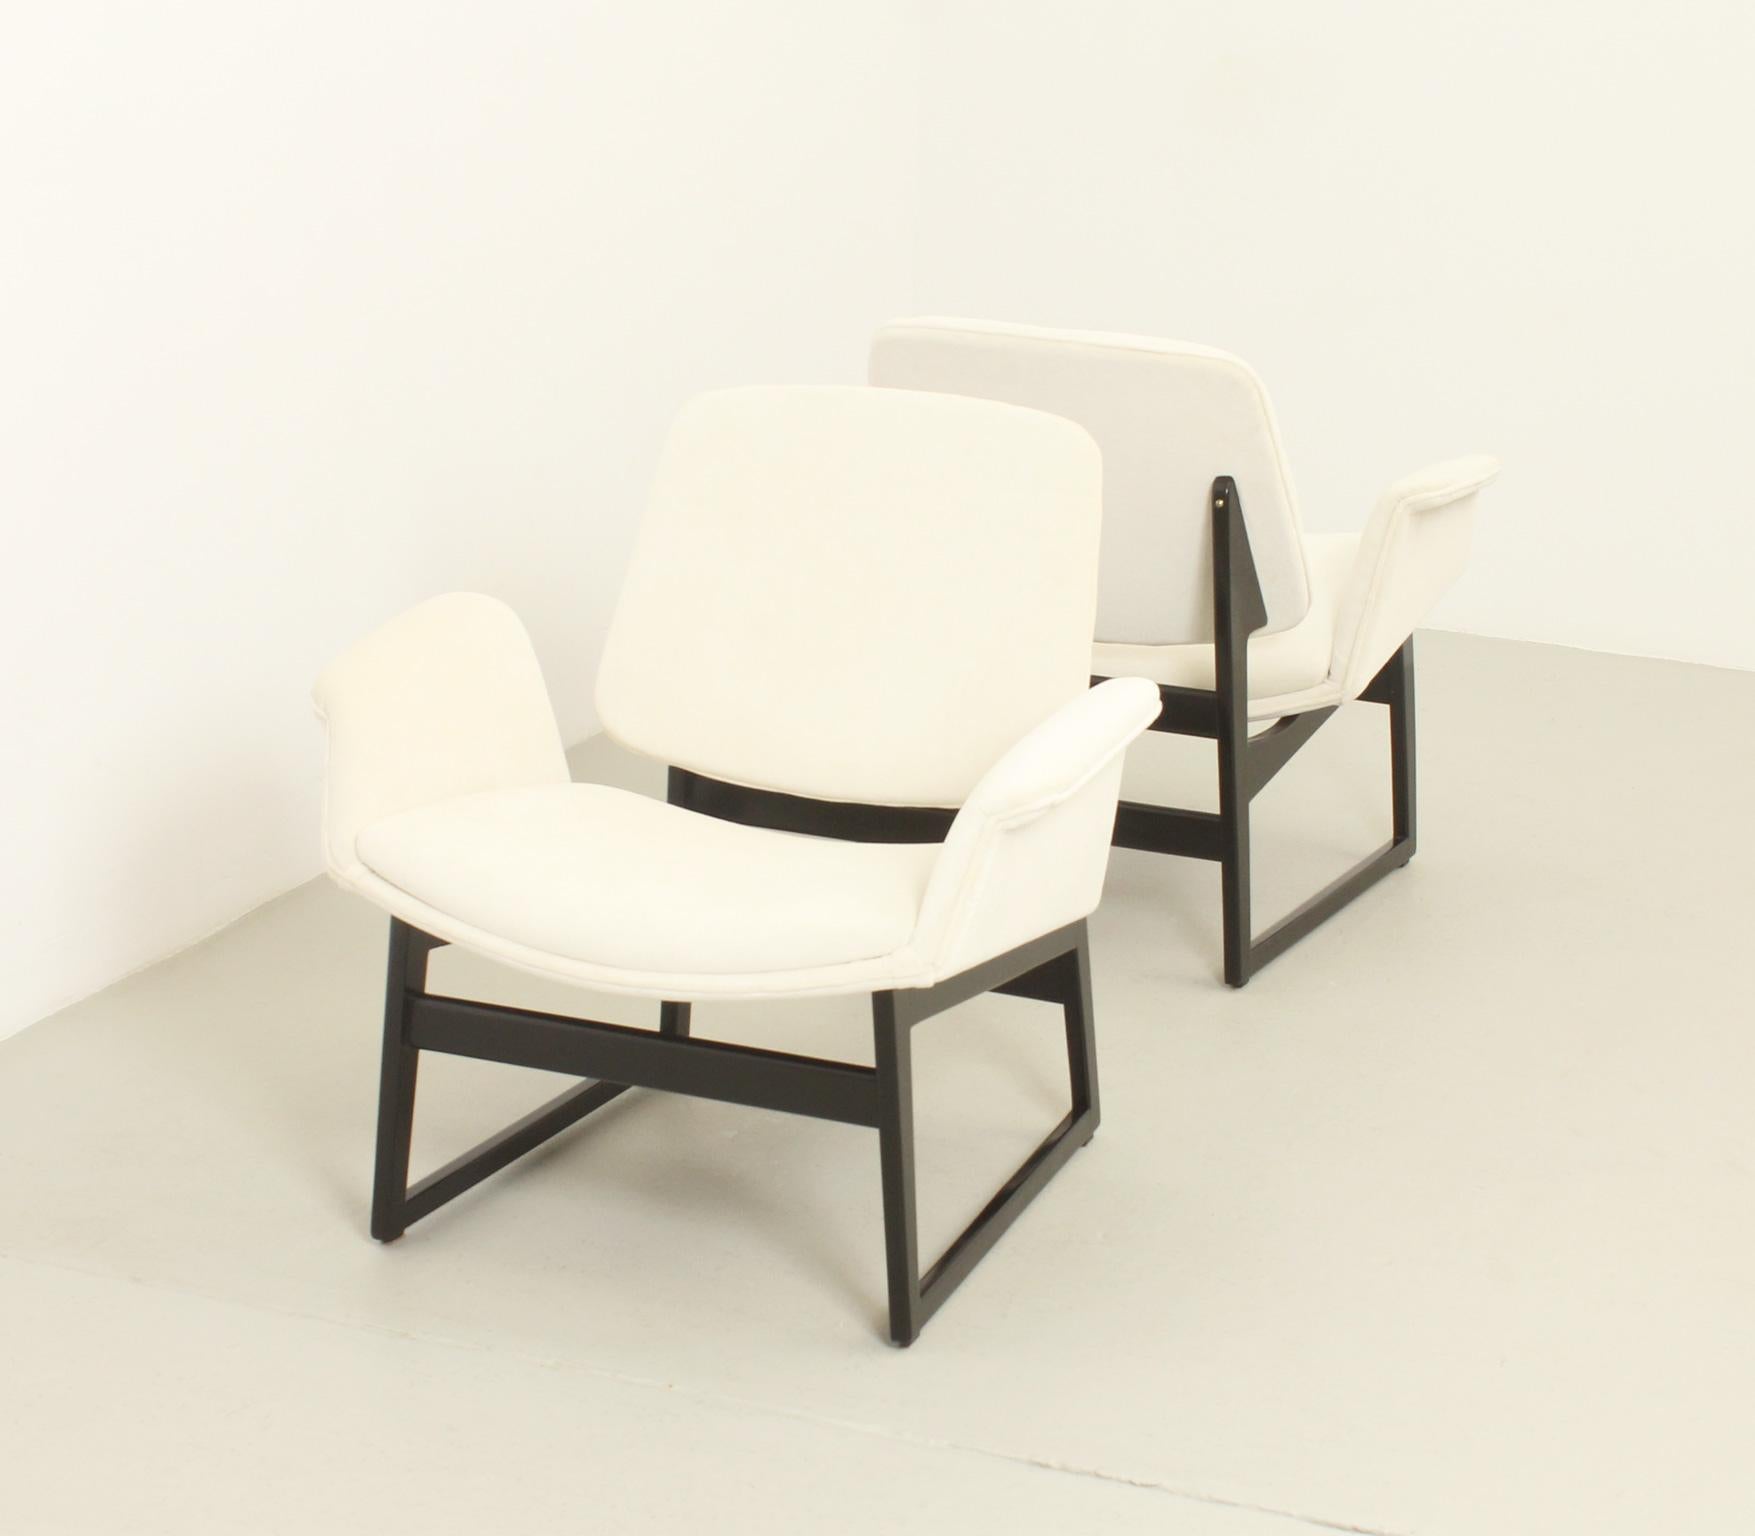 Illum Wikkelsø Lounge Chairs for Arflex, Italy, 1960 For Sale 4